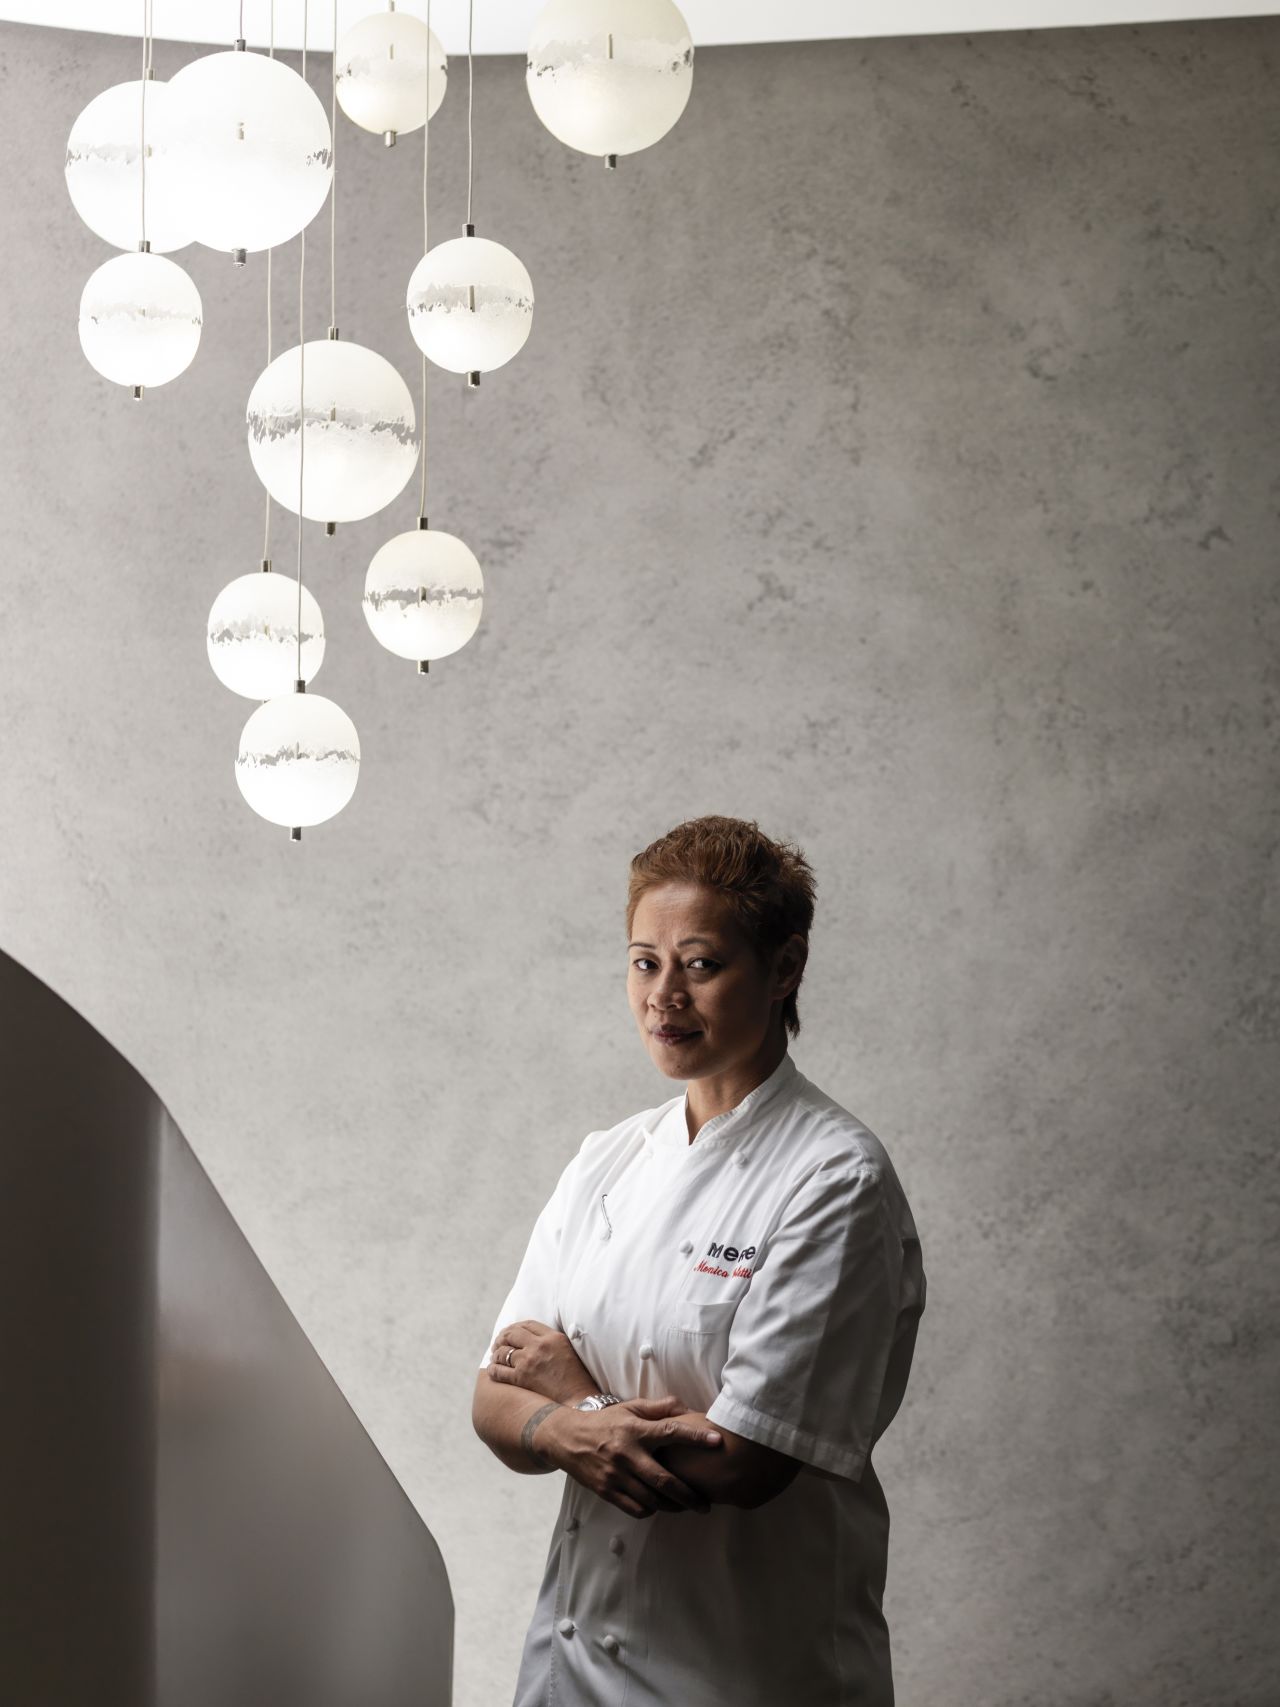  A new name to Royal Ascot's culinary stakes is Samoan-born, New Zealand native Monica Galetti, who will take up residence of The Balmoral in the Royal Enclosure. 